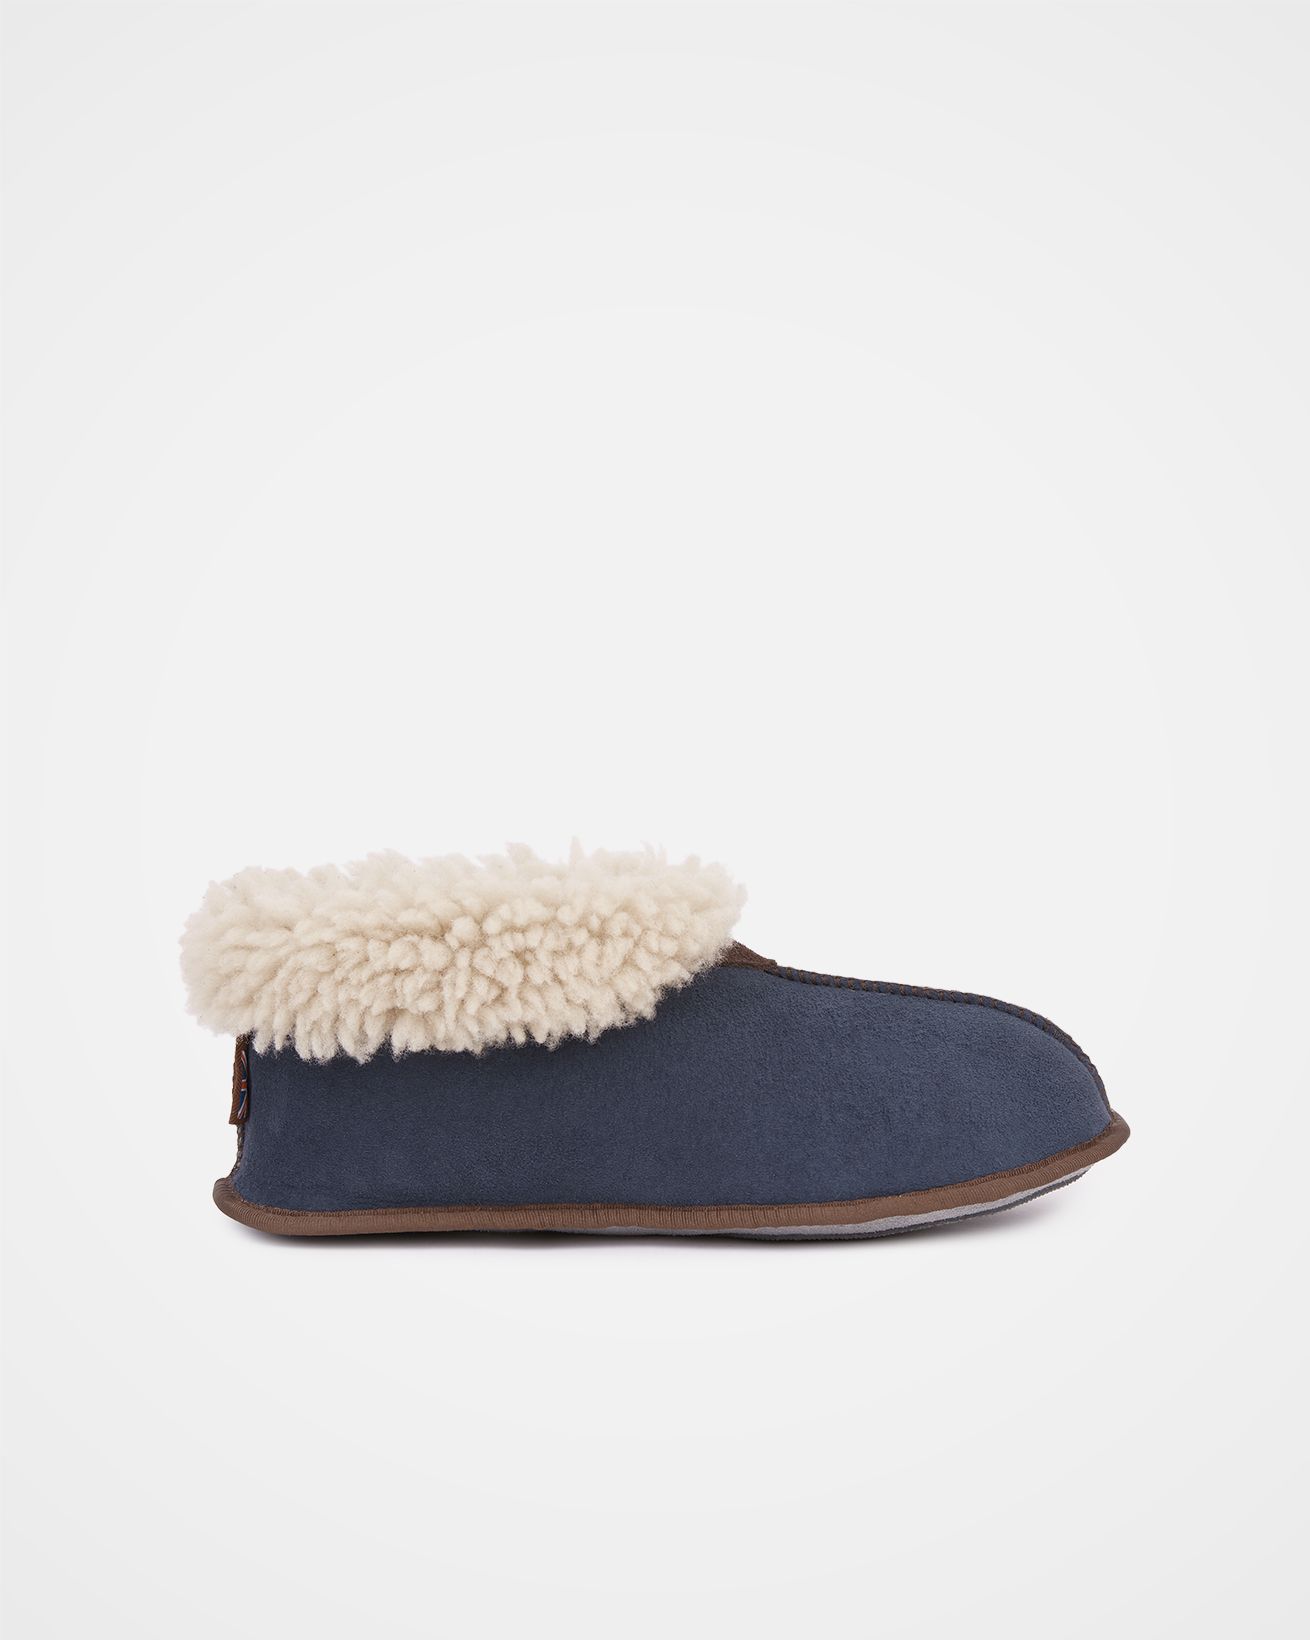 Ladies Soft Bootee Slippers